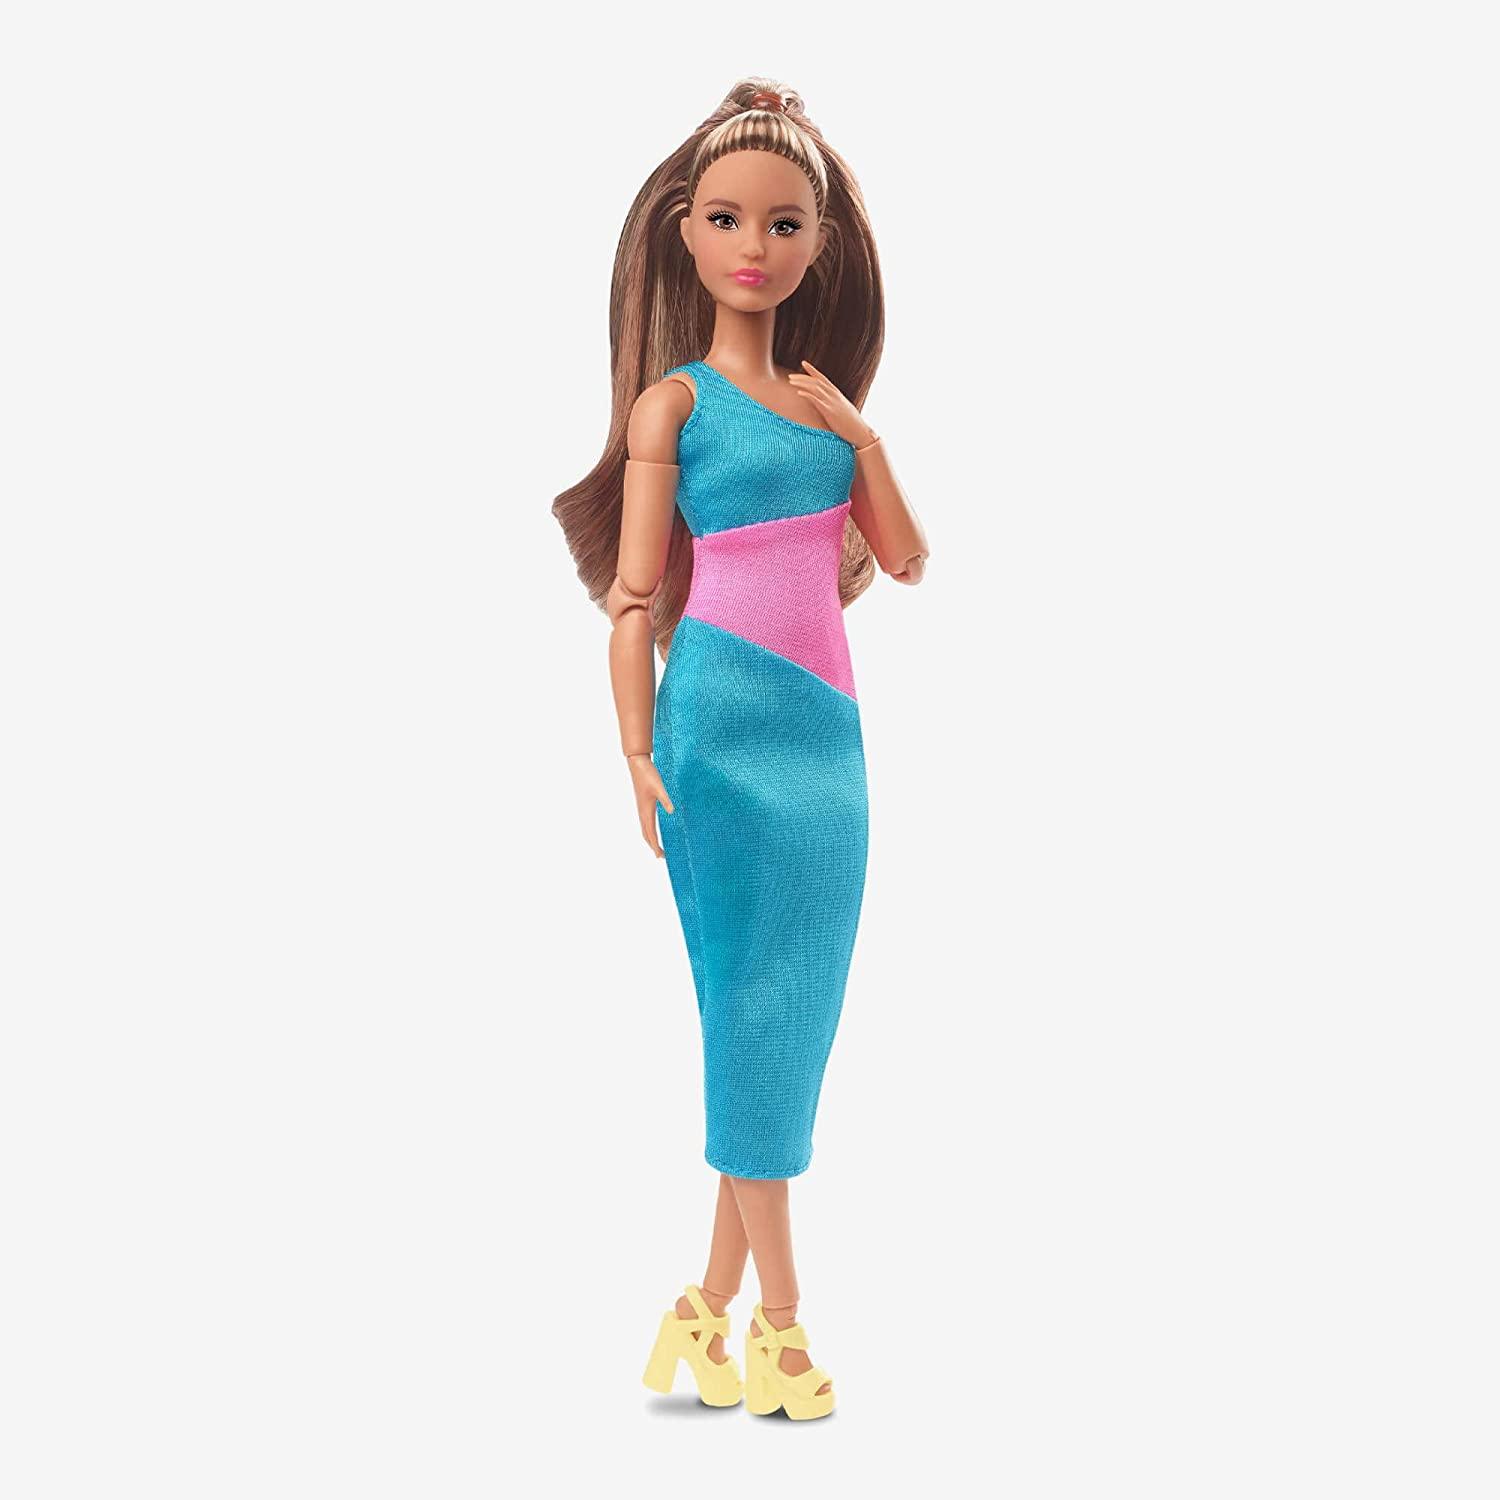 Barbie Looks Doll, Brunette, Color Block One-Shoulder Midi Dress, Style and Pose, Fashion Collectibles, Barbie Signature Looks 2023 - BumbleToys - 5-7 Years, Barbie, Fashion Dolls & Accessories, Girls, Pre-Order